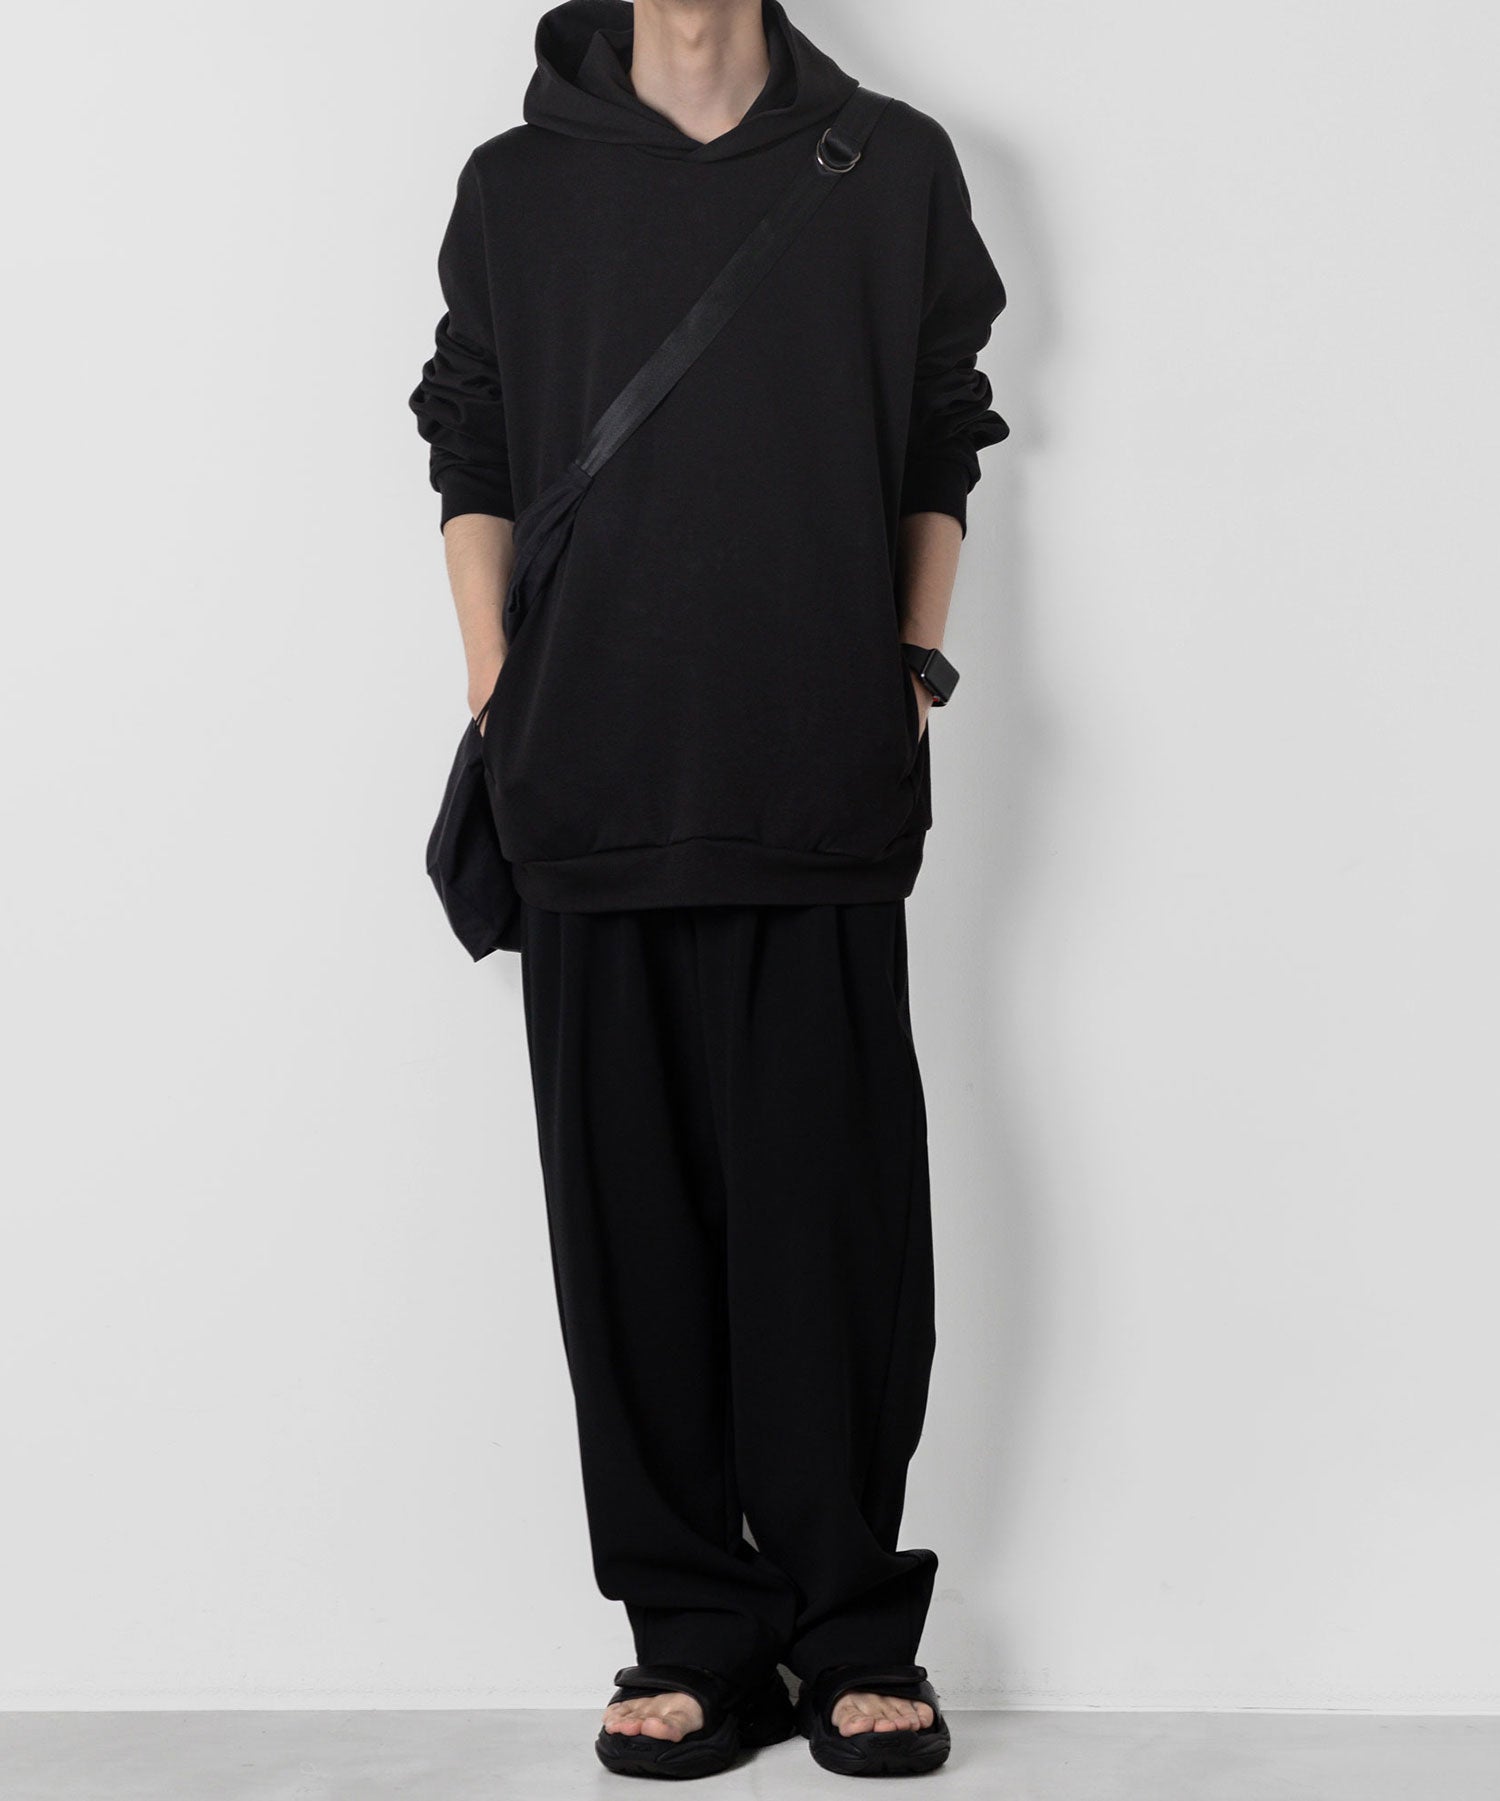 【ATTACHMENT】ATTACHMENT アタッチメントのCO/PE DOUBLE KNIT HOODIE - BLACK 公式通販サイトsession福岡セレクトショップ